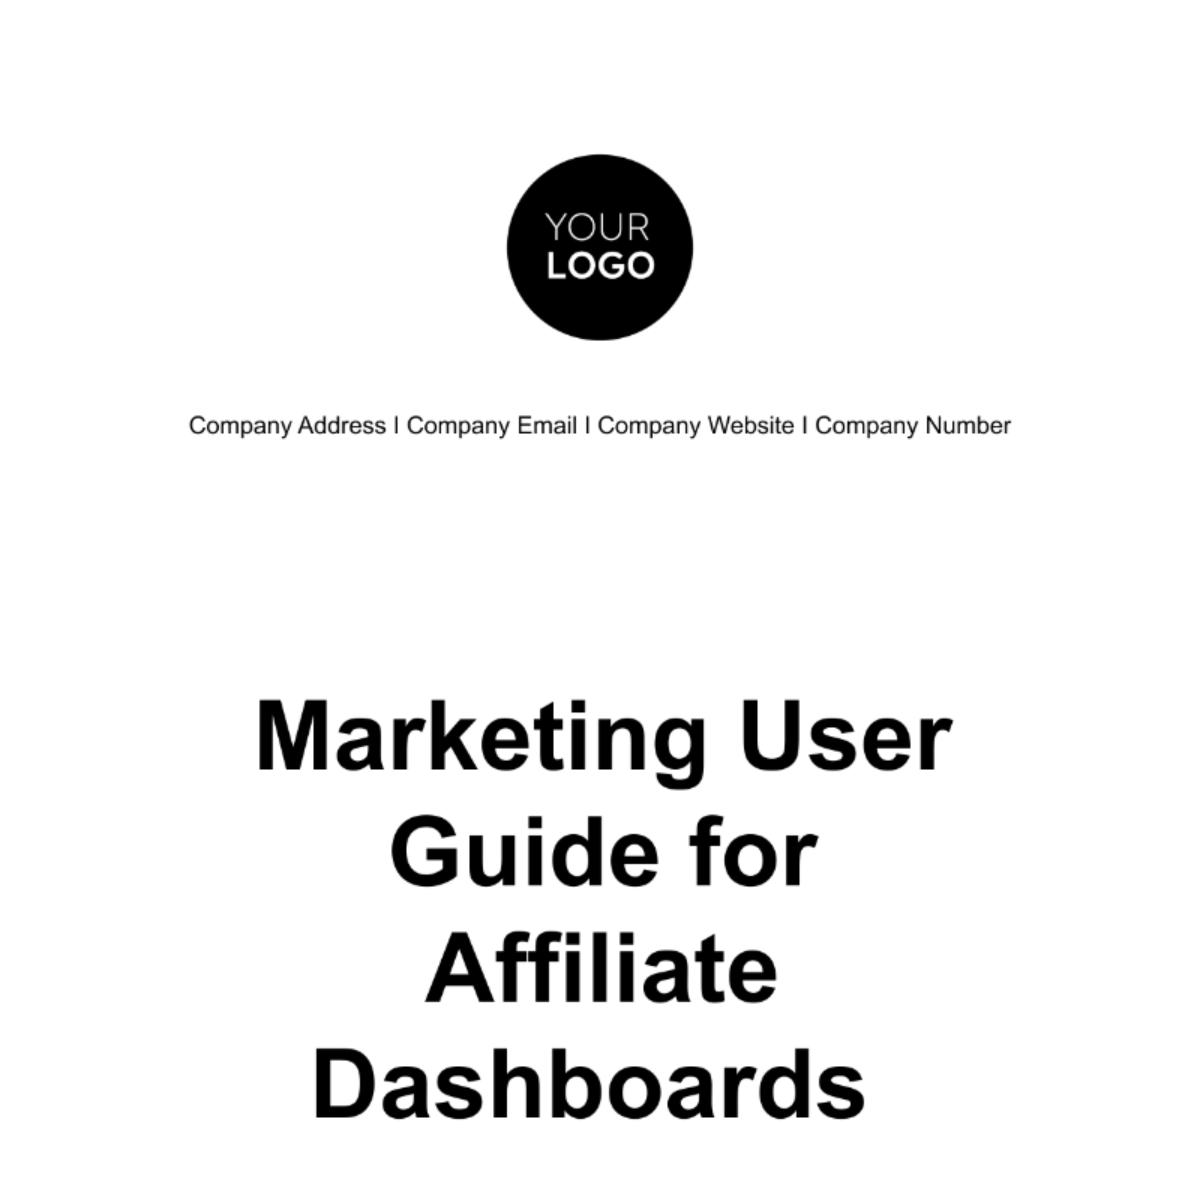 Marketing User Guide for Affiliate Dashboards Template